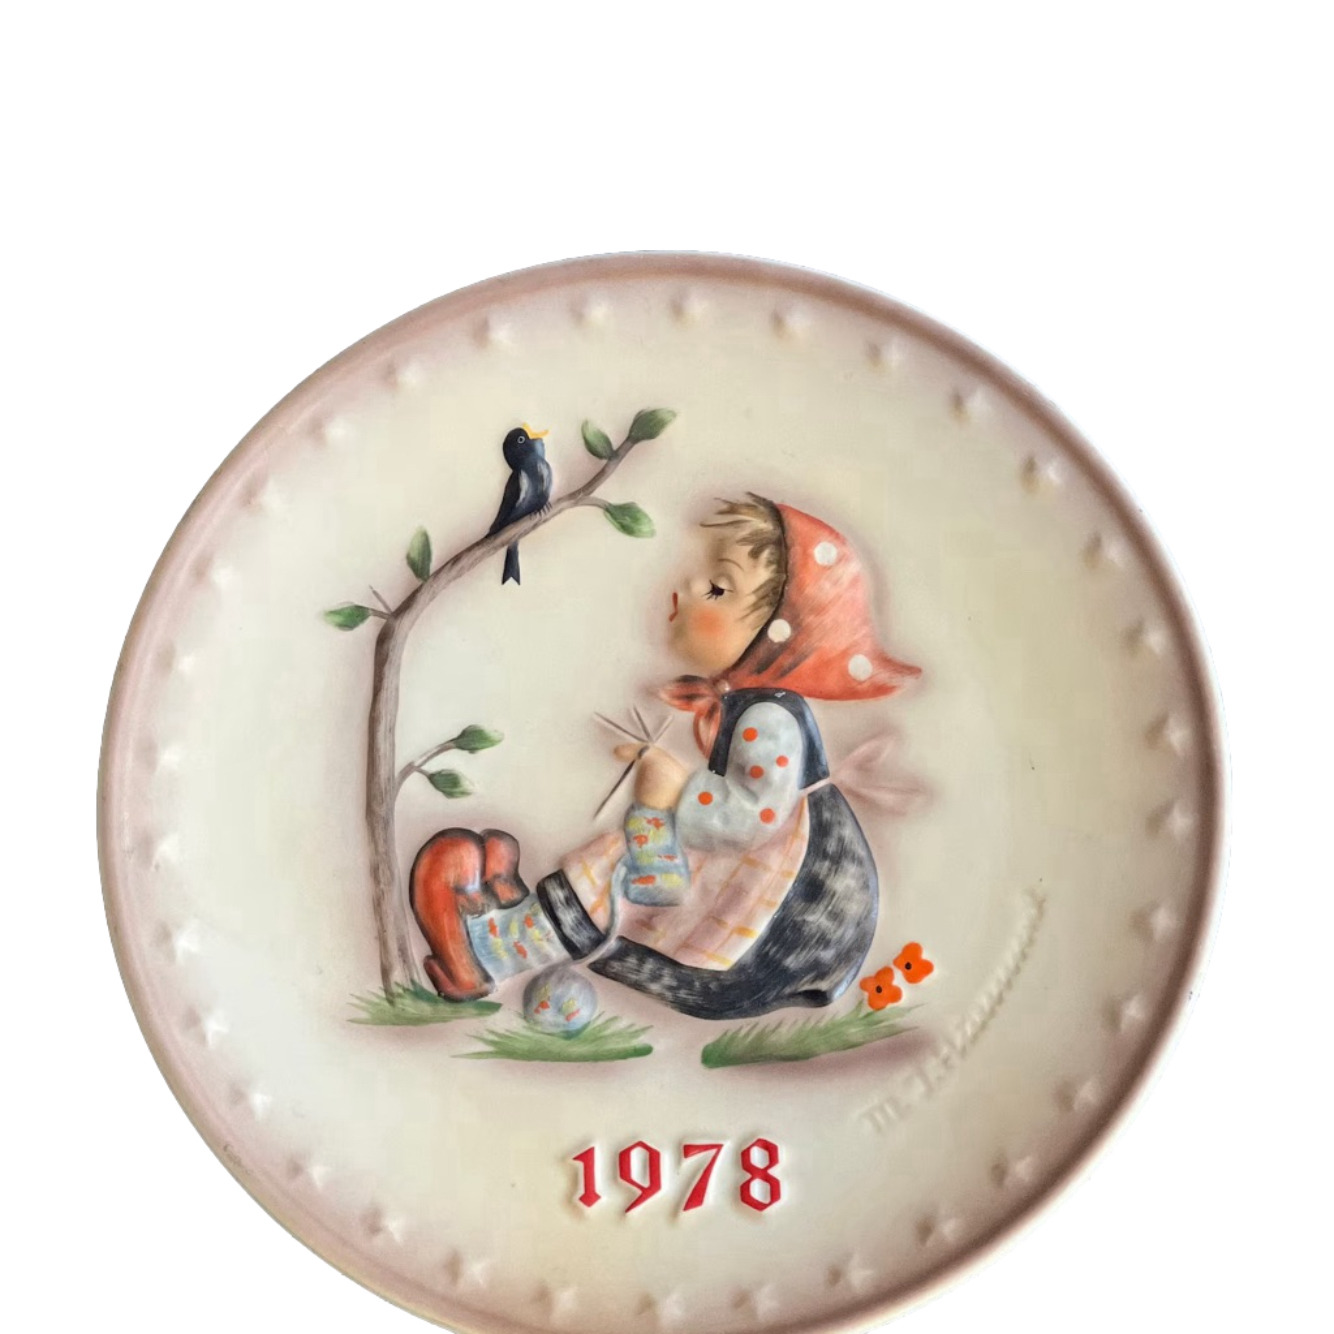 Goebel Hummel 8th Annual Plate 1978 Happy pastime”